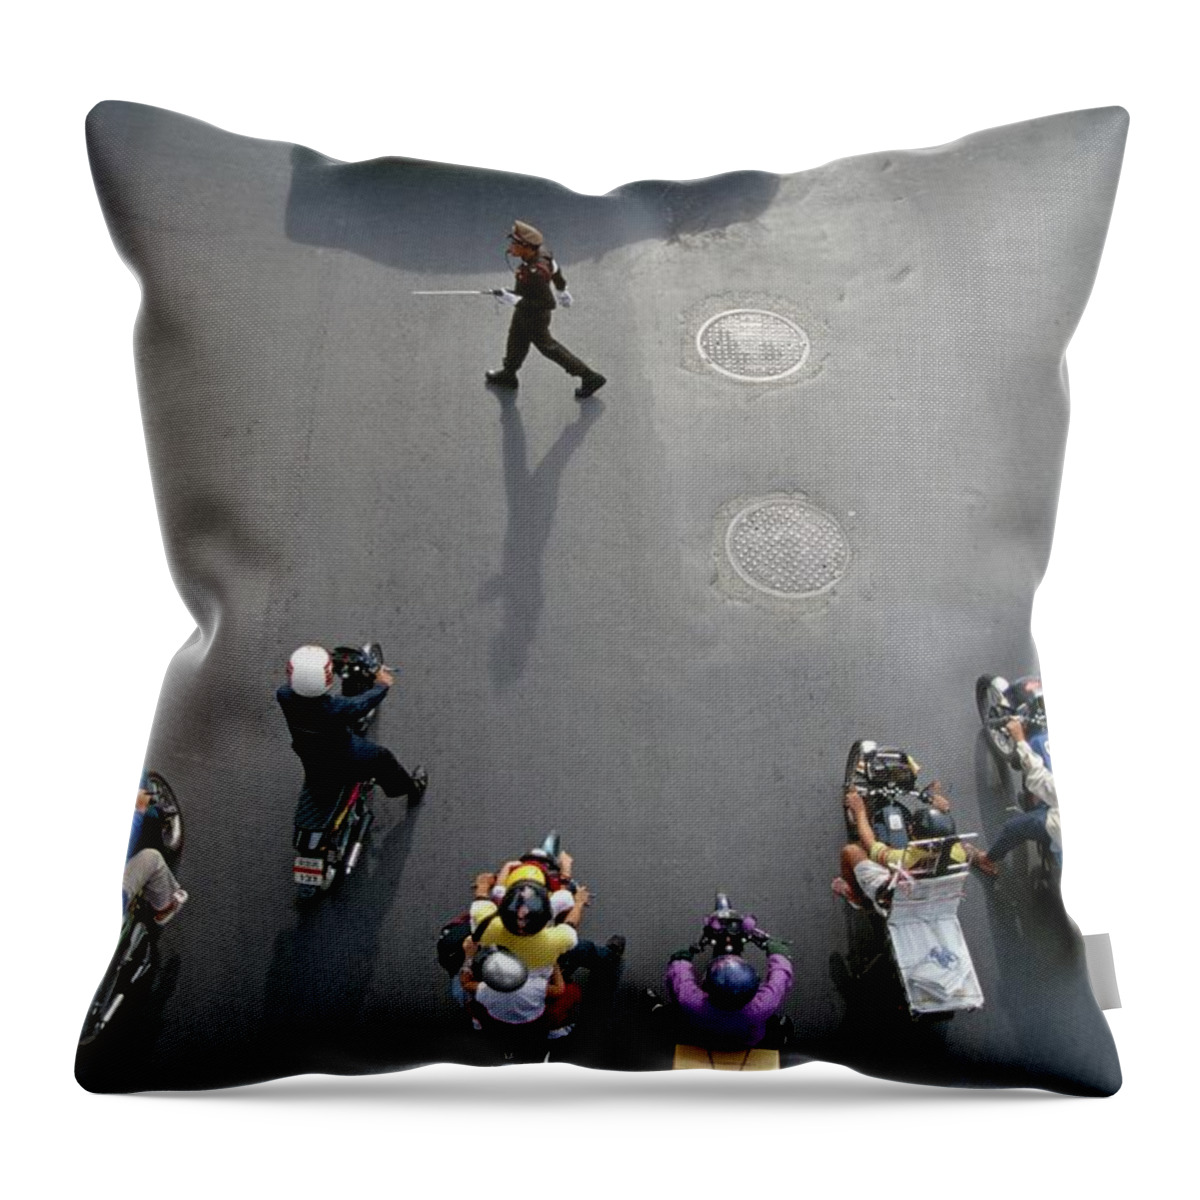 Crash Helmet Throw Pillow featuring the photograph People Riding Motor Scooters On City by Marc Volk